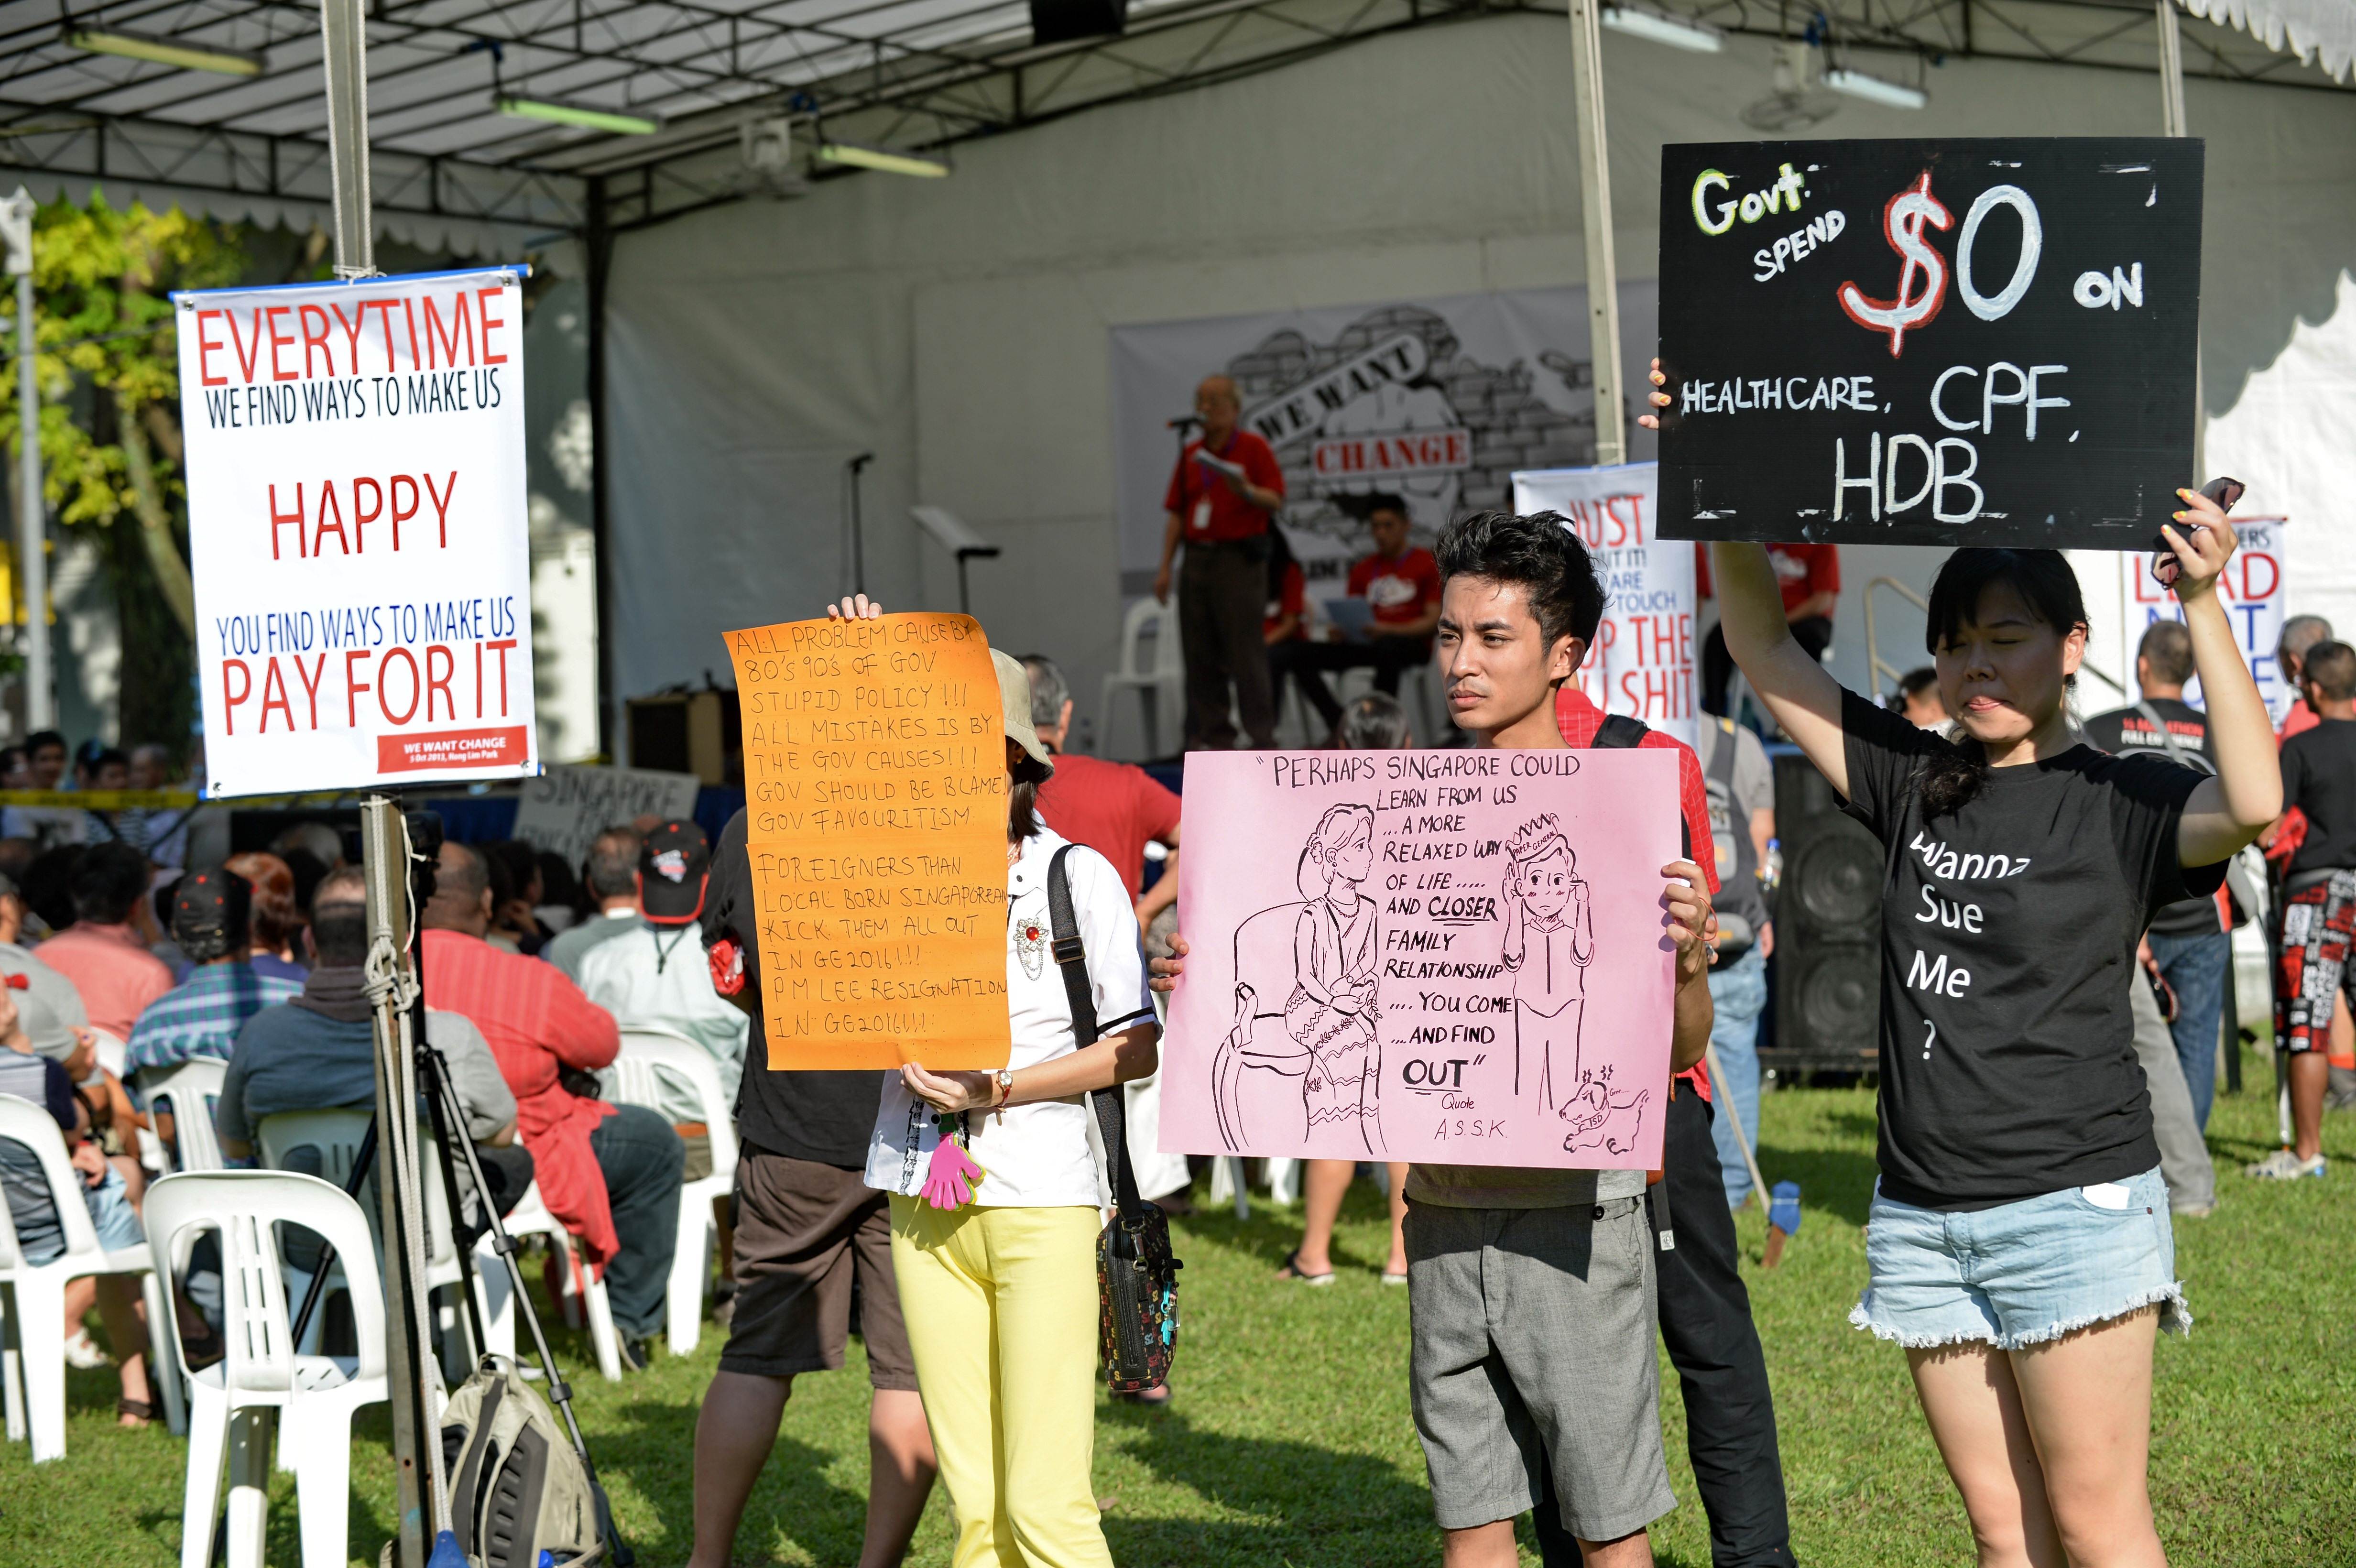 Protesters display placards during a rally at the speakers corner in Singapore on Saturday. Photo: AFP